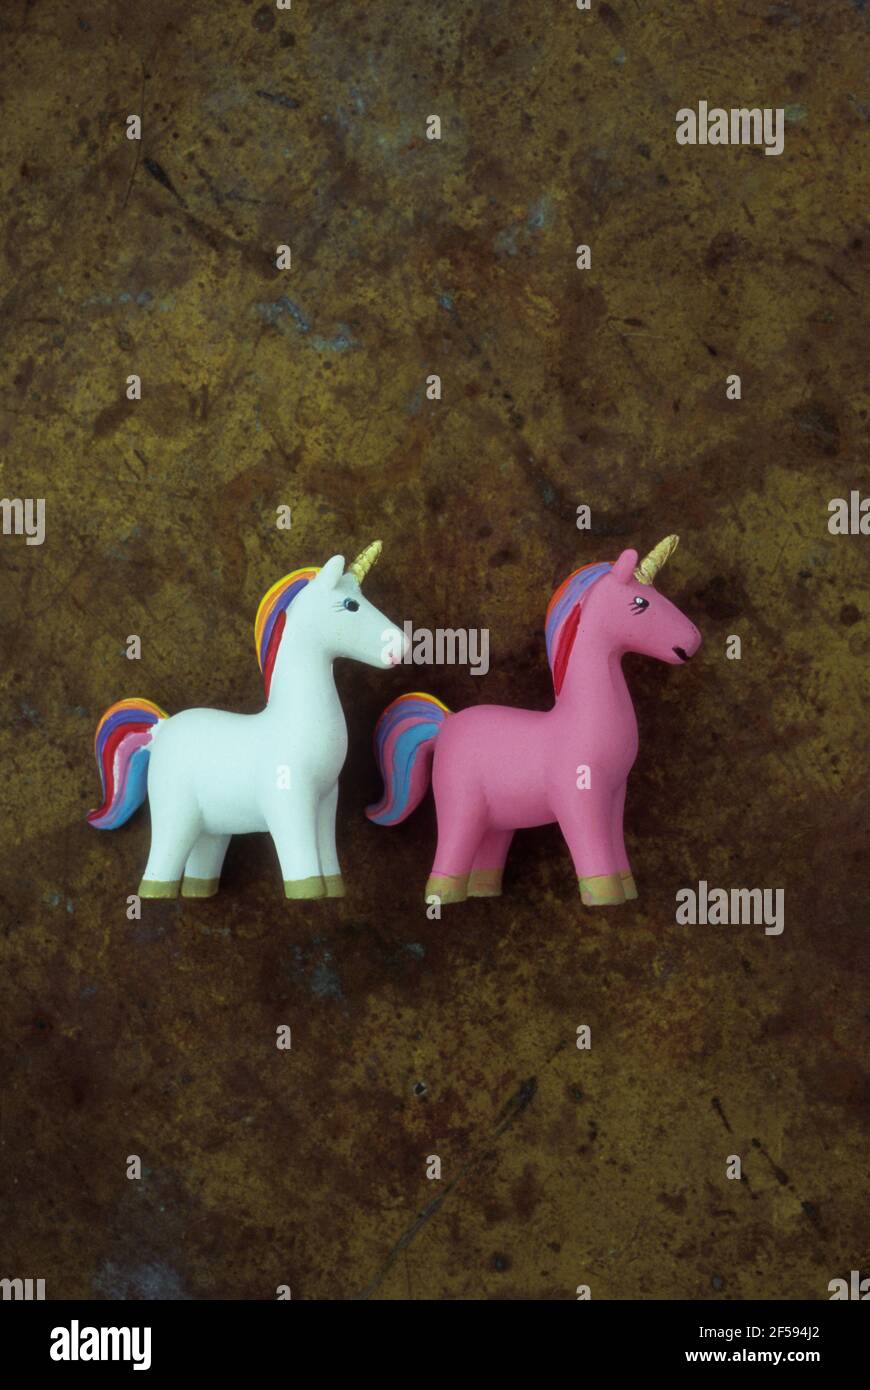 Models of one white and one pink unicorns with rainbow tails and manes and gold horns standing head to tail Stock Photo